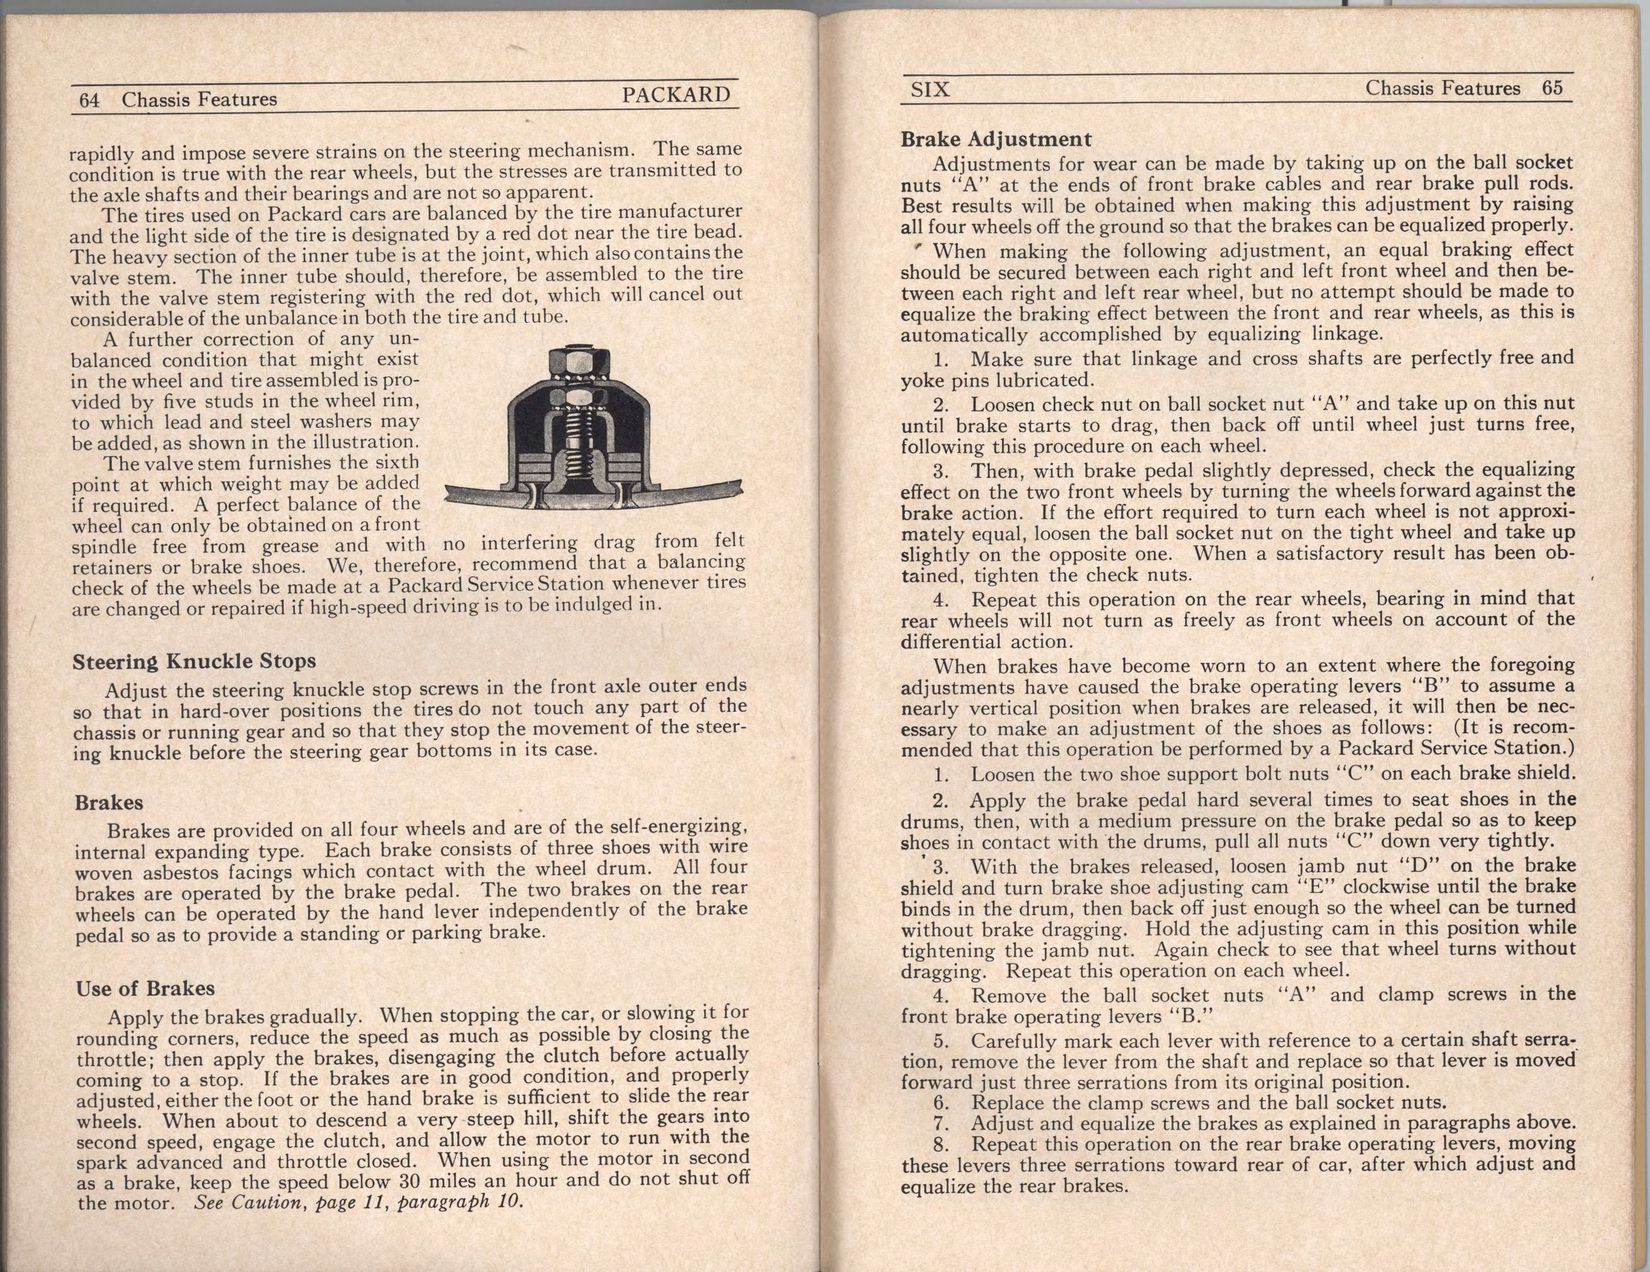 1927 Packard Six Owners Manual Page 15